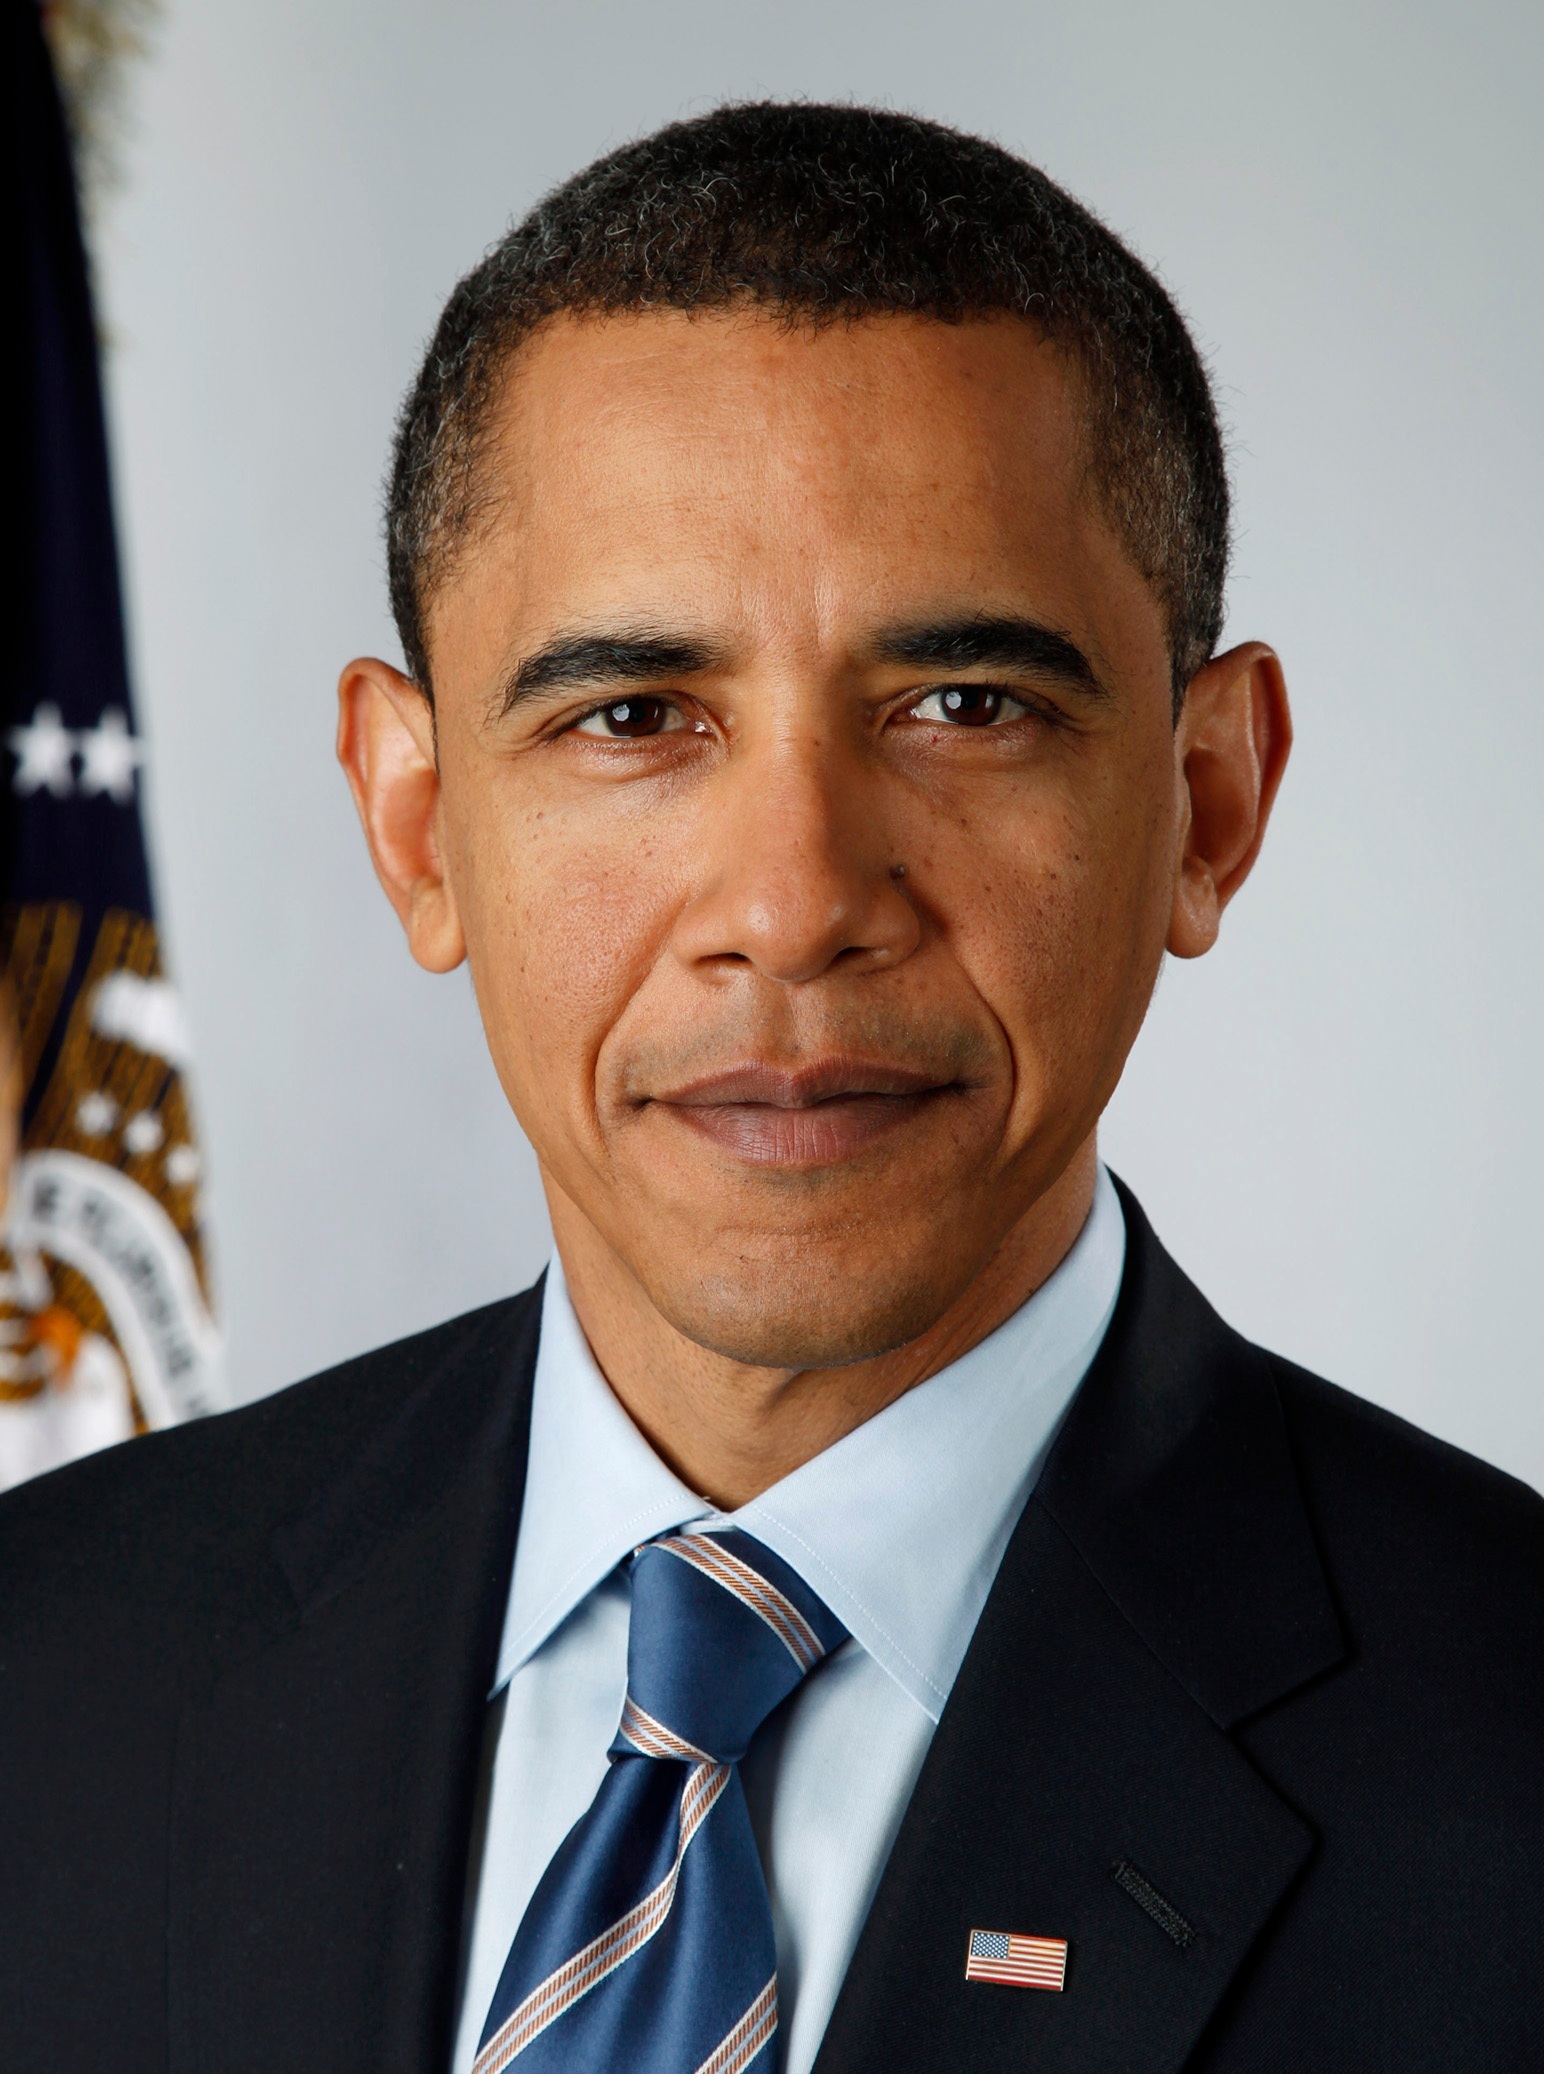 Barack Obama, the 44th president of the United States